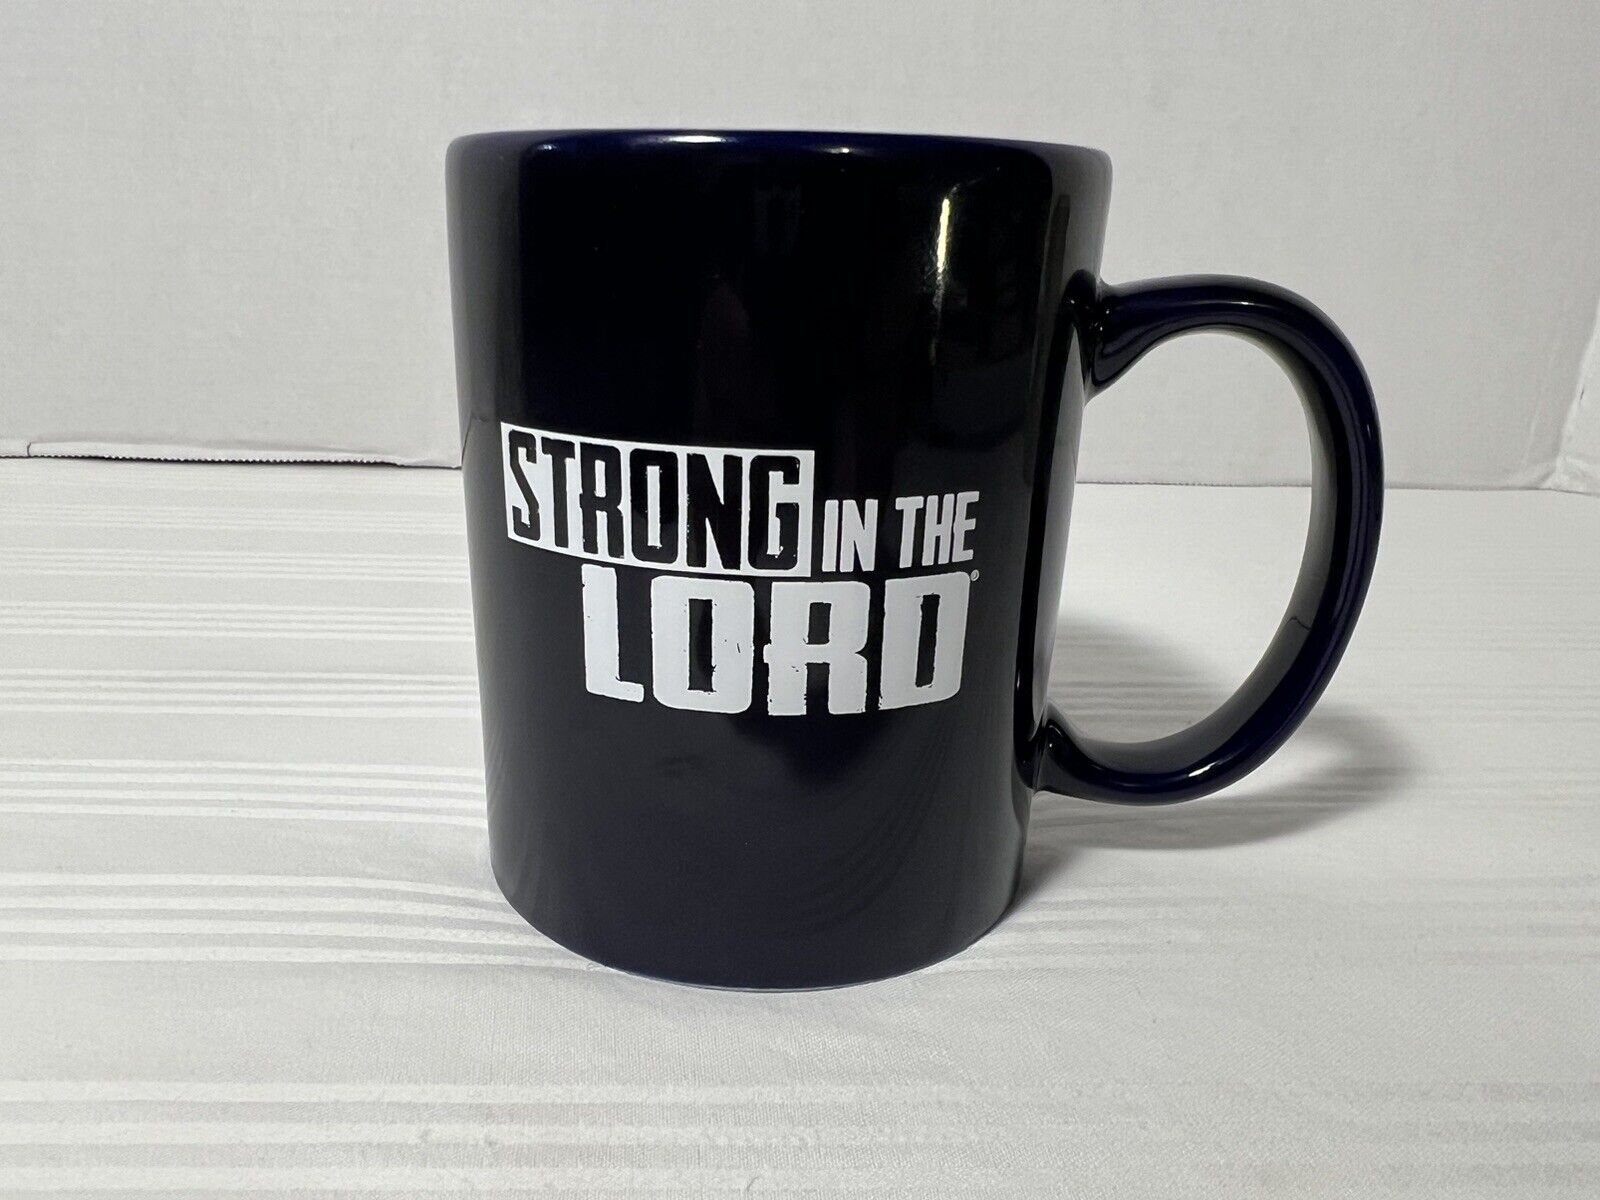 GOD IS MY STRENGTH AND POWER - 2 SAMUEL 22:33 - Coffee Mug - STRONG IN THE LORD